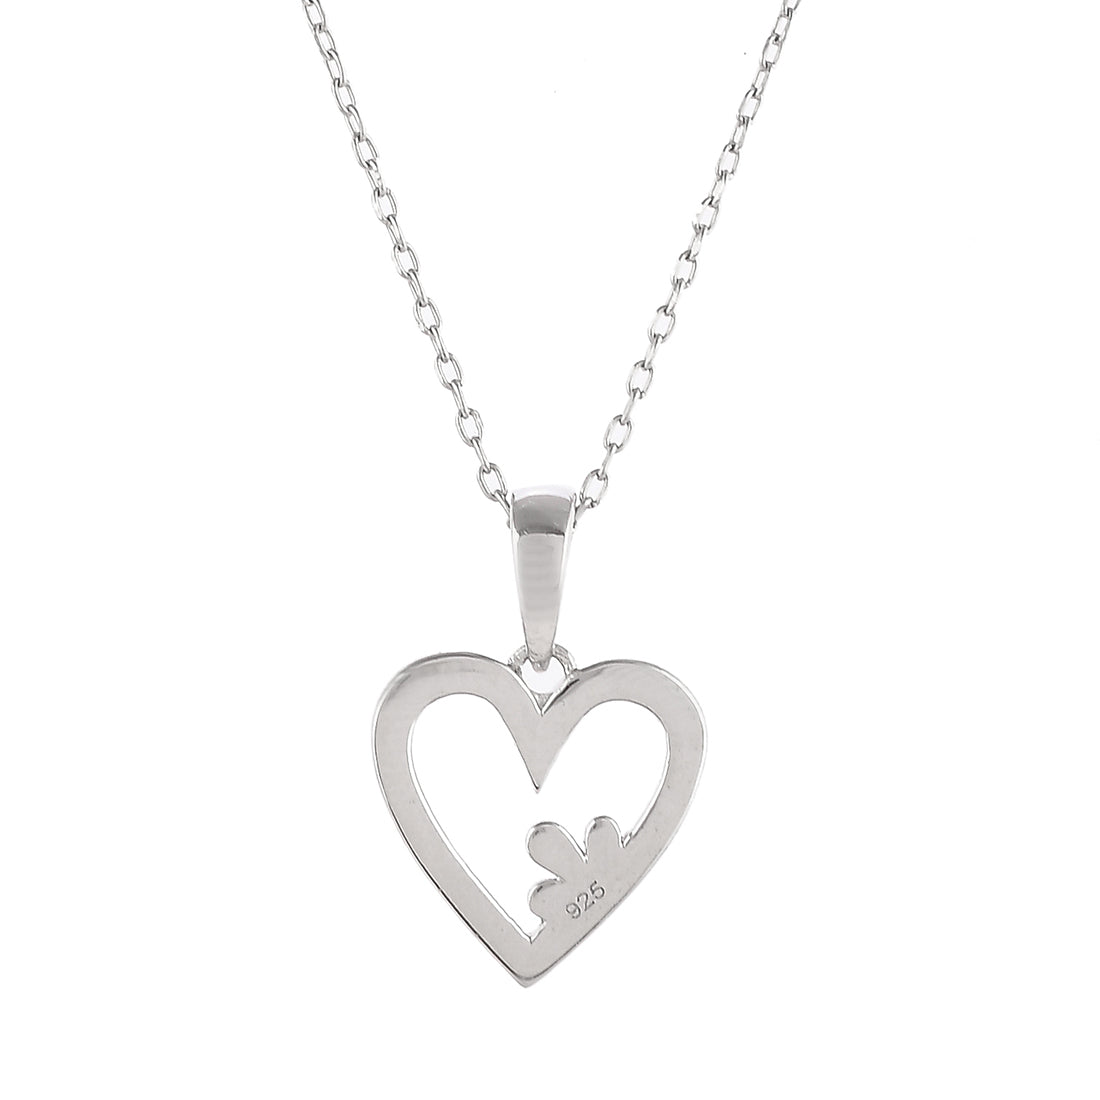 Best Silver Magnetic Clover Heart Necklace - Best Silver Four Heart  Necklace. Best Heart Necklace